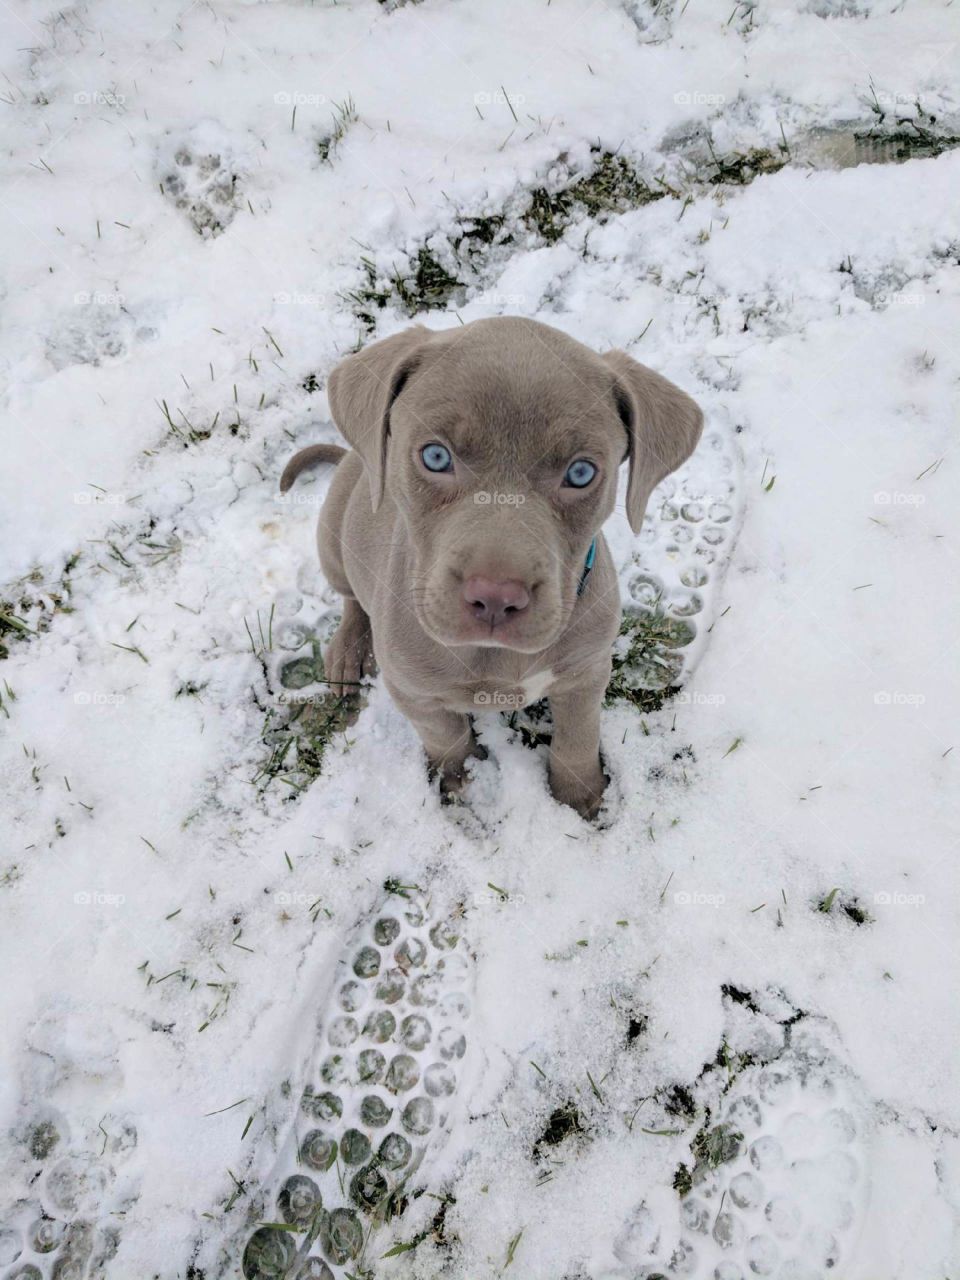 “What is this cold, white stuff mom?” 